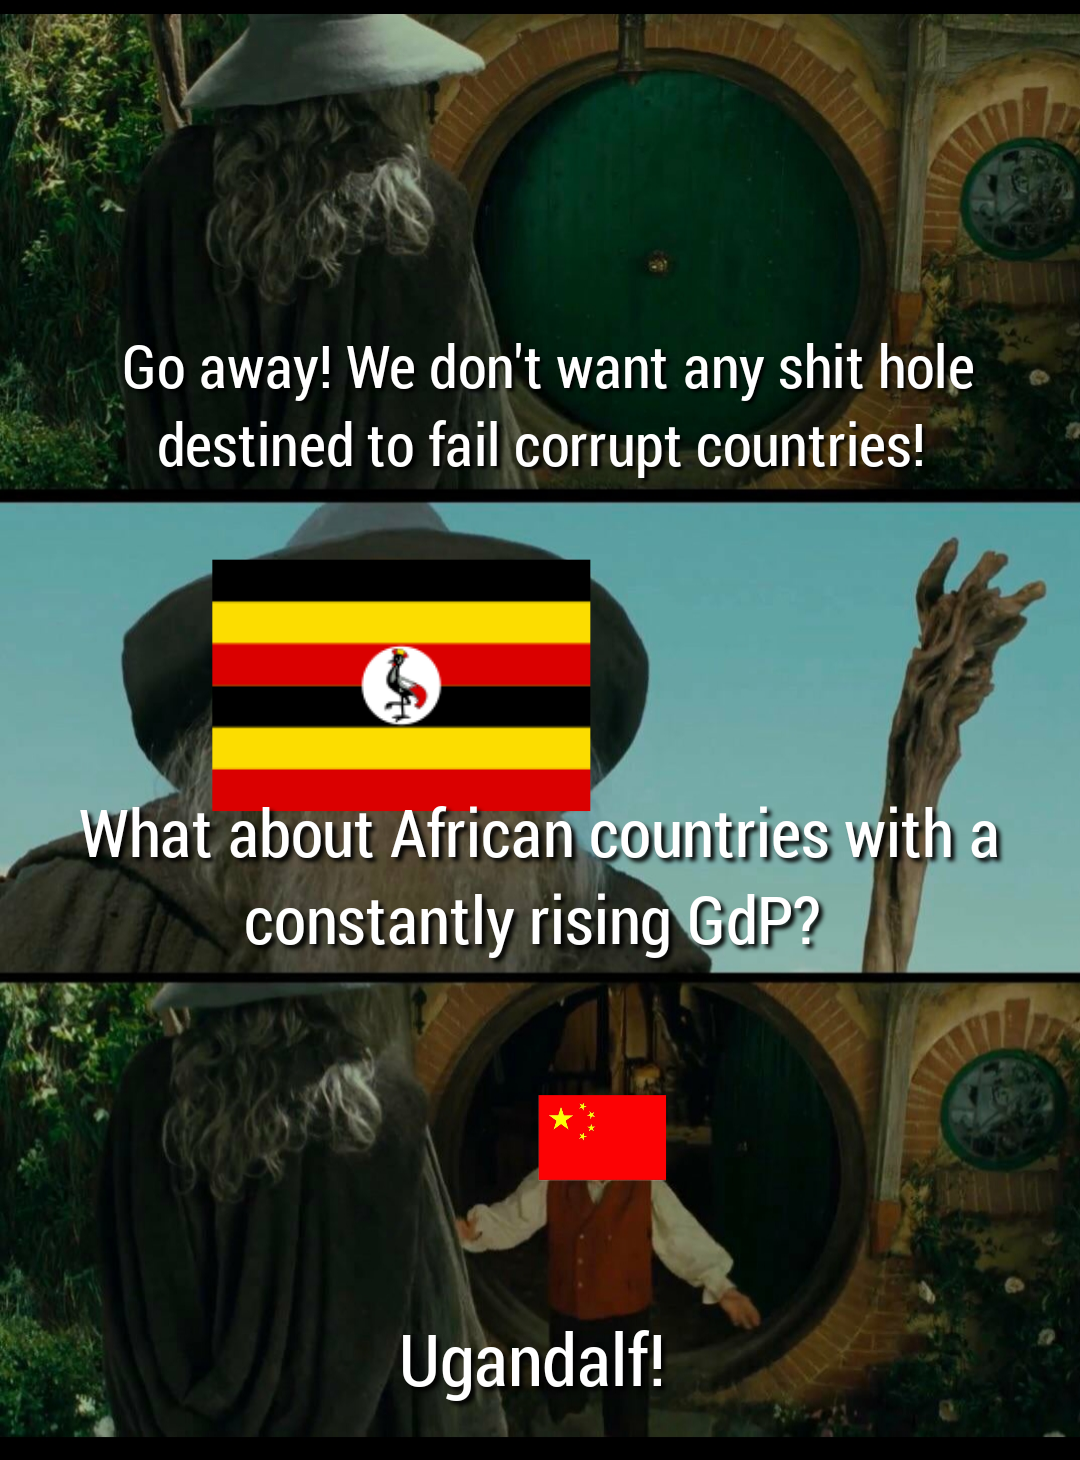 Chinese slave trade when?